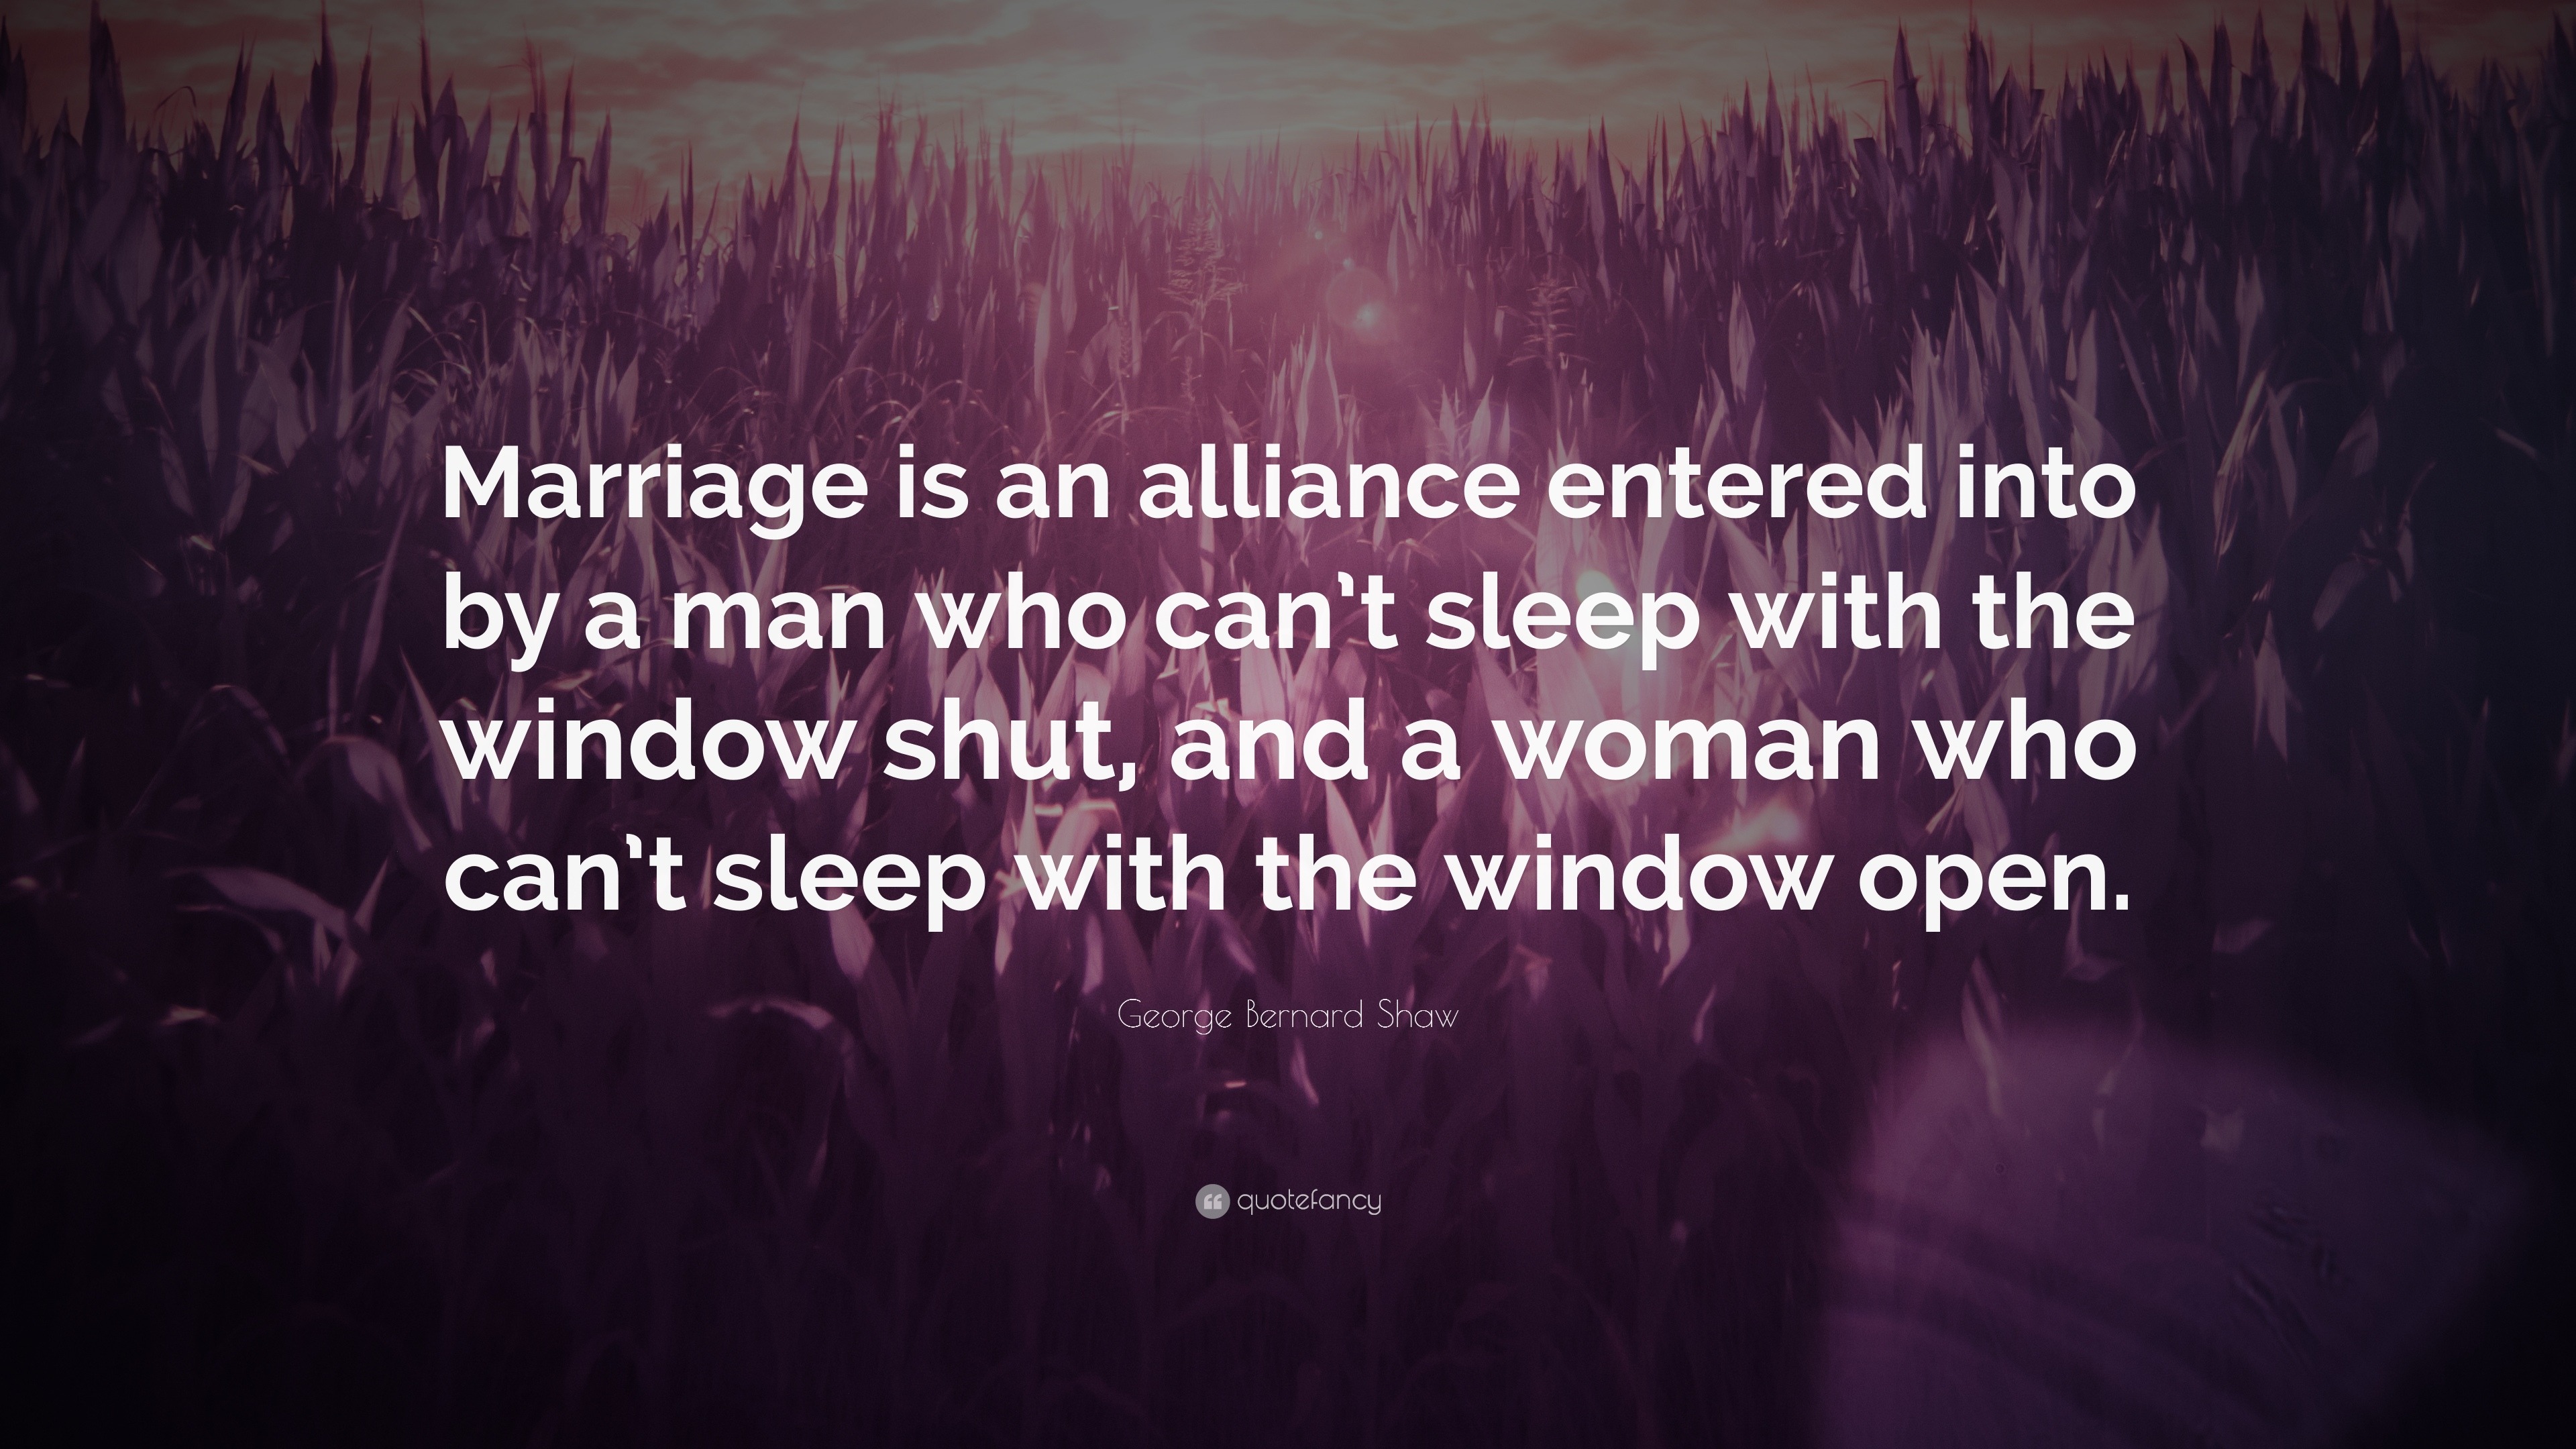 George Bernard Shaw Quote “Marriage is an alliance entered into by a man who